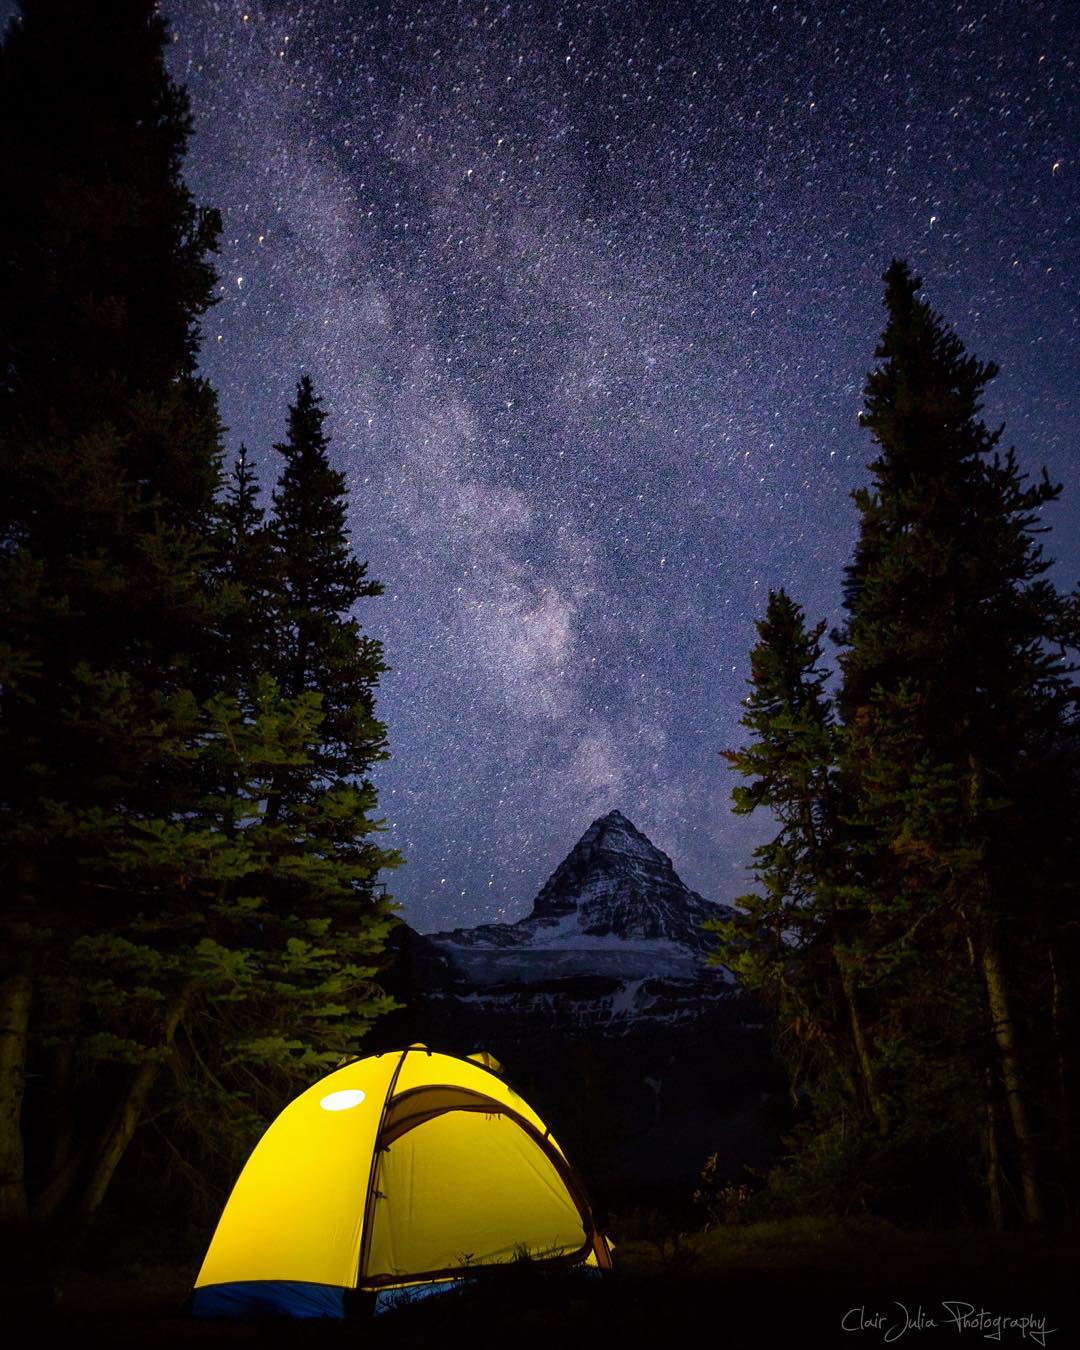 A yellow tent lit from inside sits in the foreground surrounded on both sides by evergreen trees. Behind, in the distance, the distinct triangular peak of Mt. Assiniboine can be seen. The sky is filled with stars, and the Milky Way is visible.